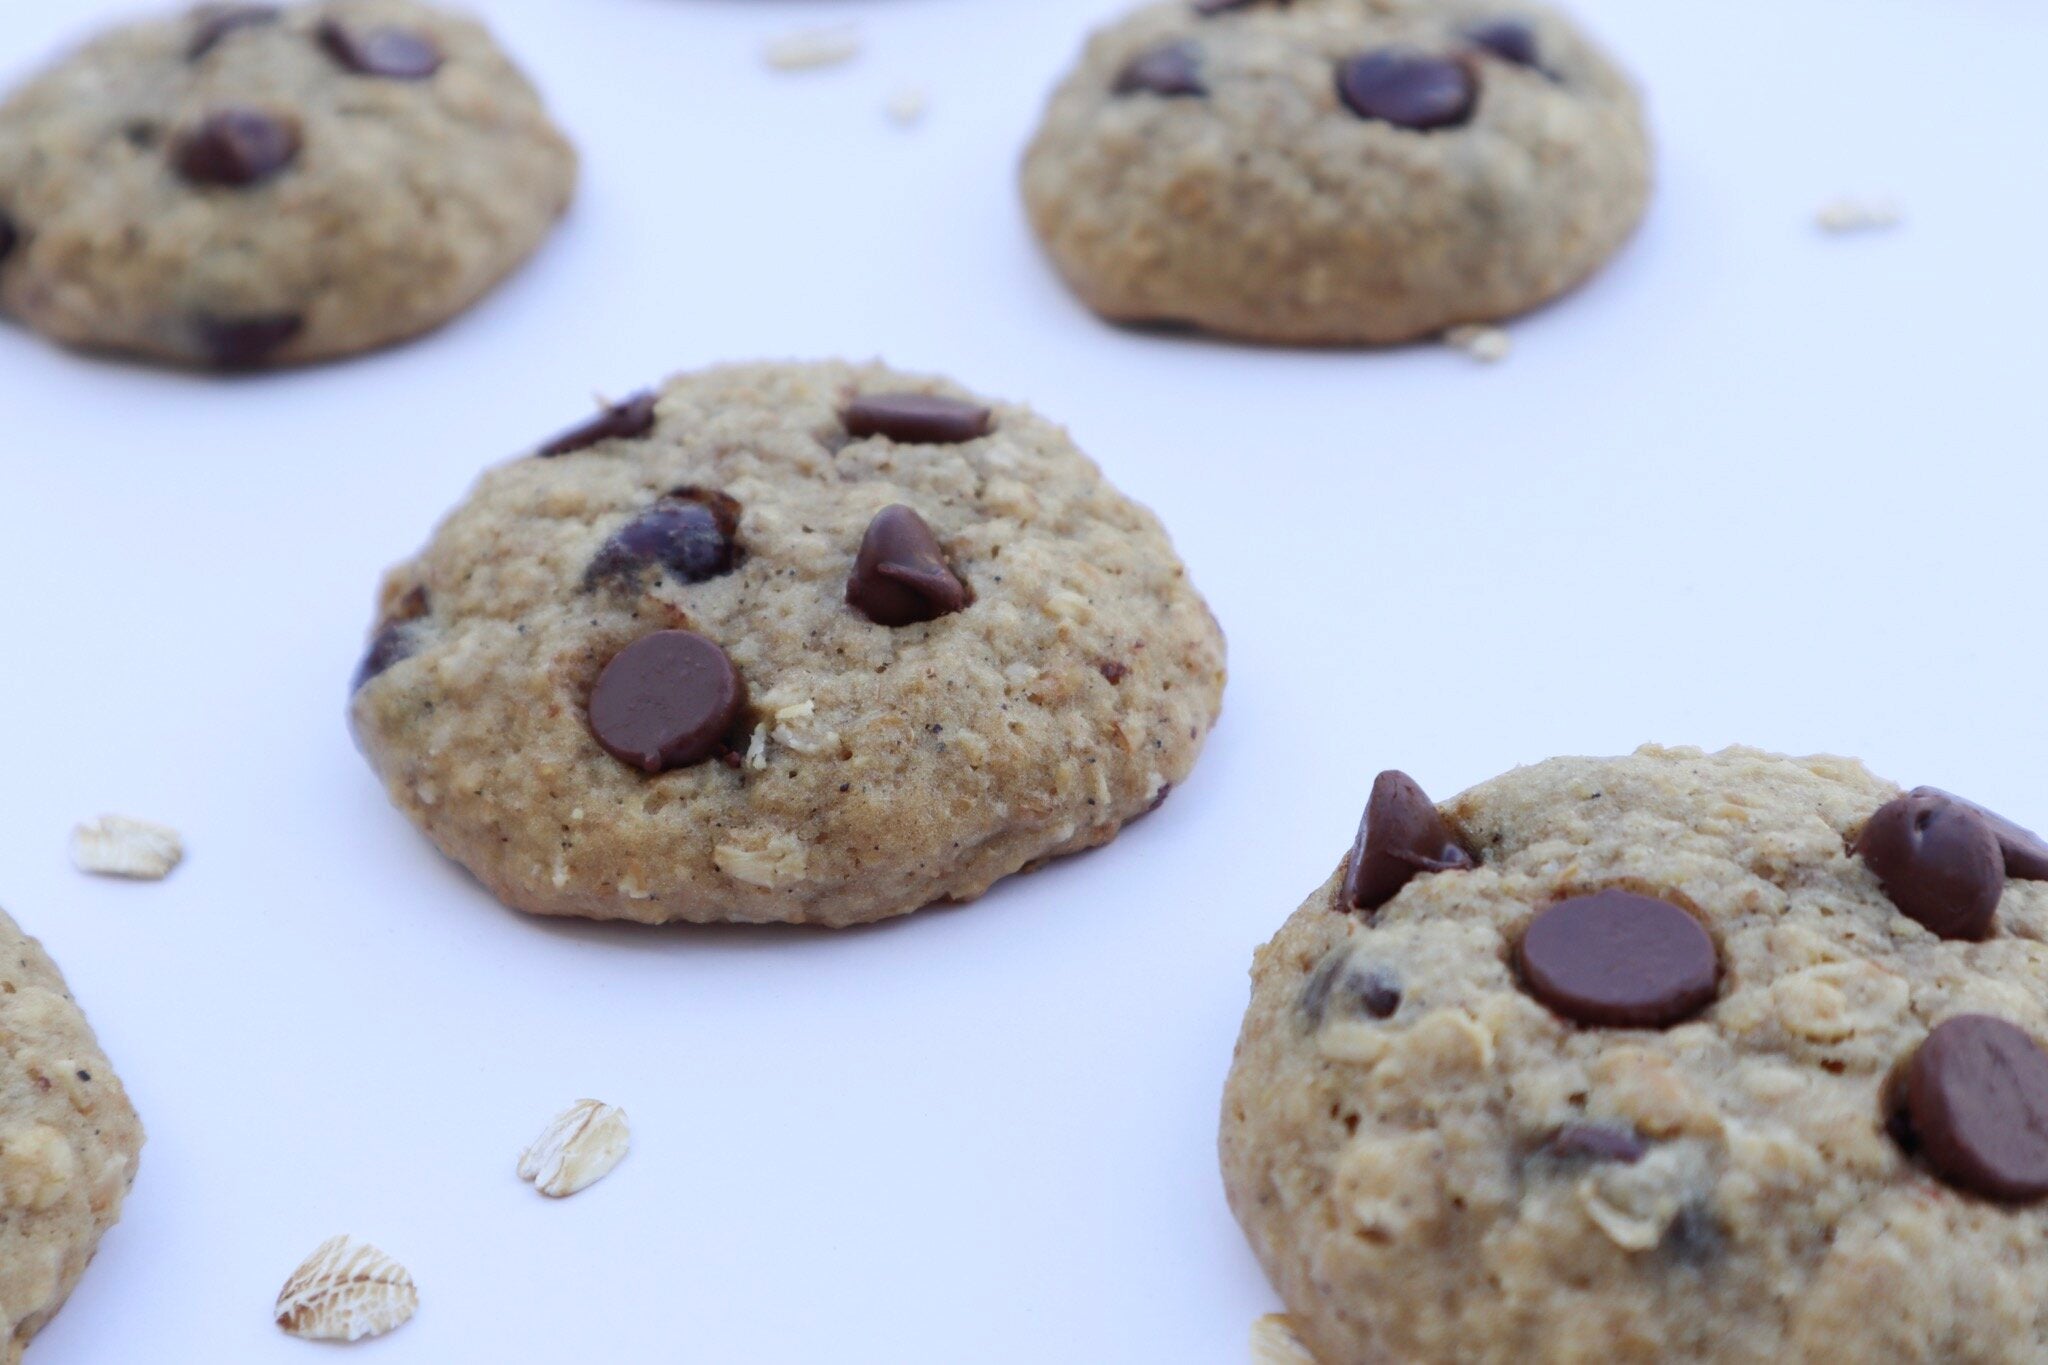 Oatmeal Peanut Butter Chocolate Chip Mix